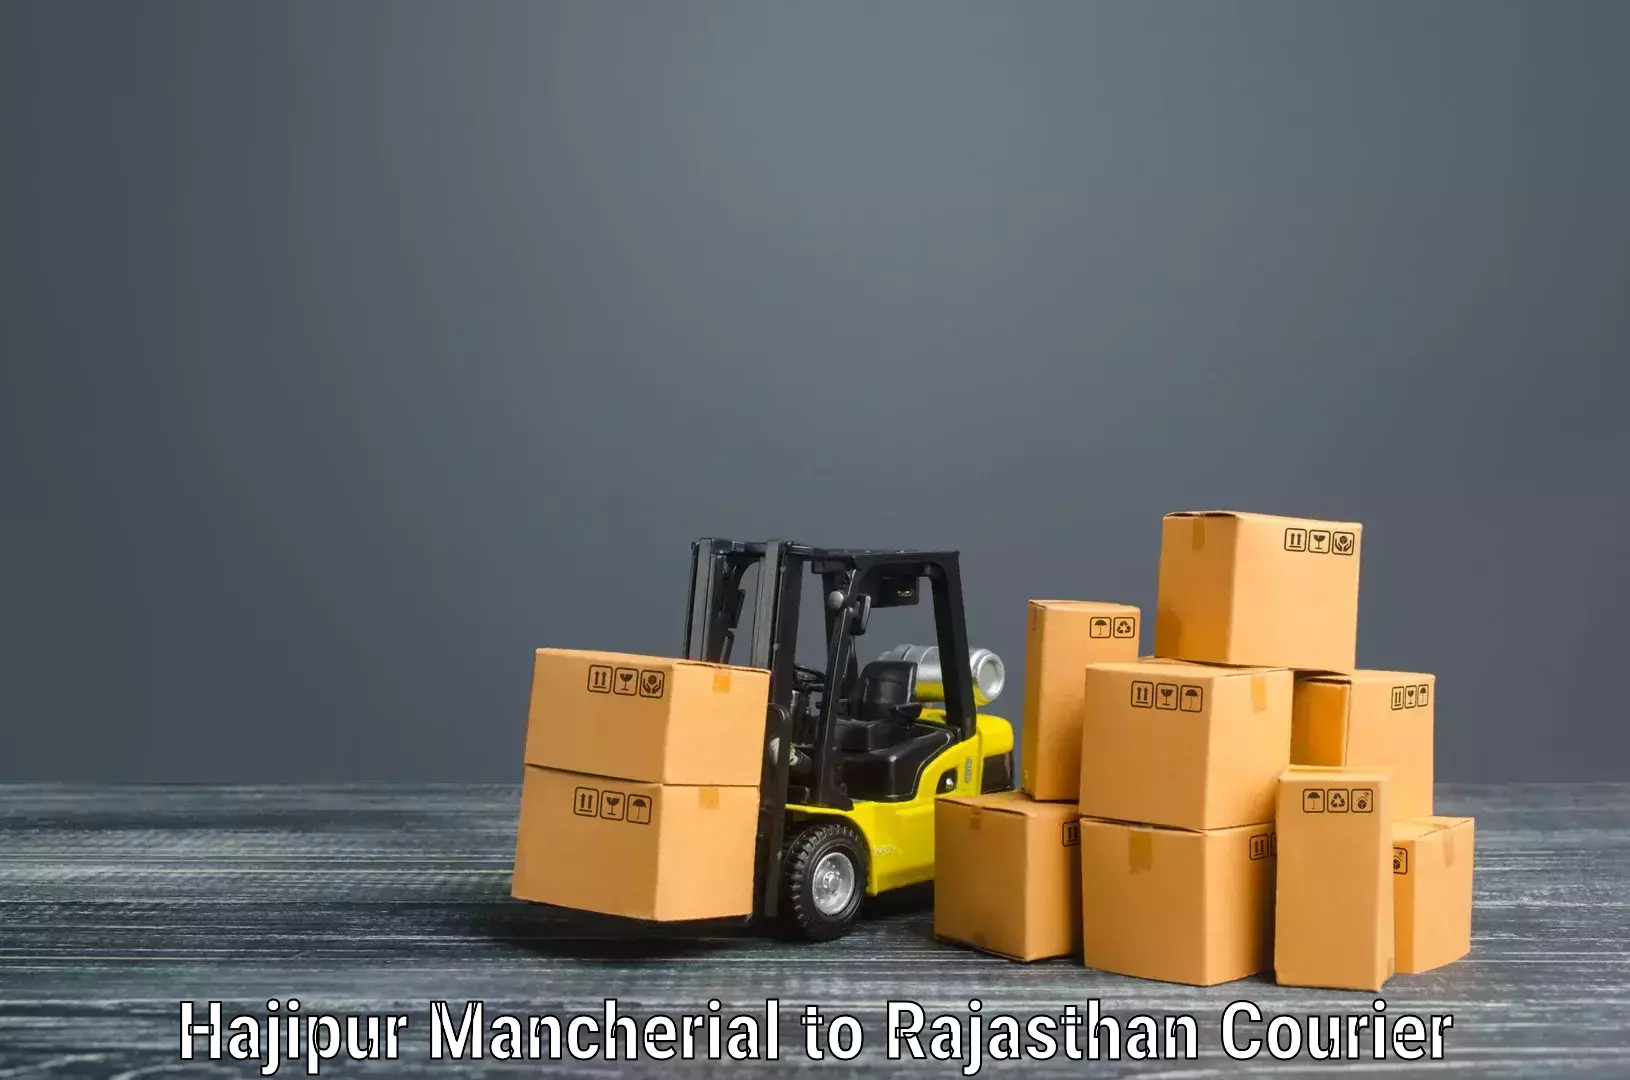 Reliable movers Hajipur Mancherial to Pali